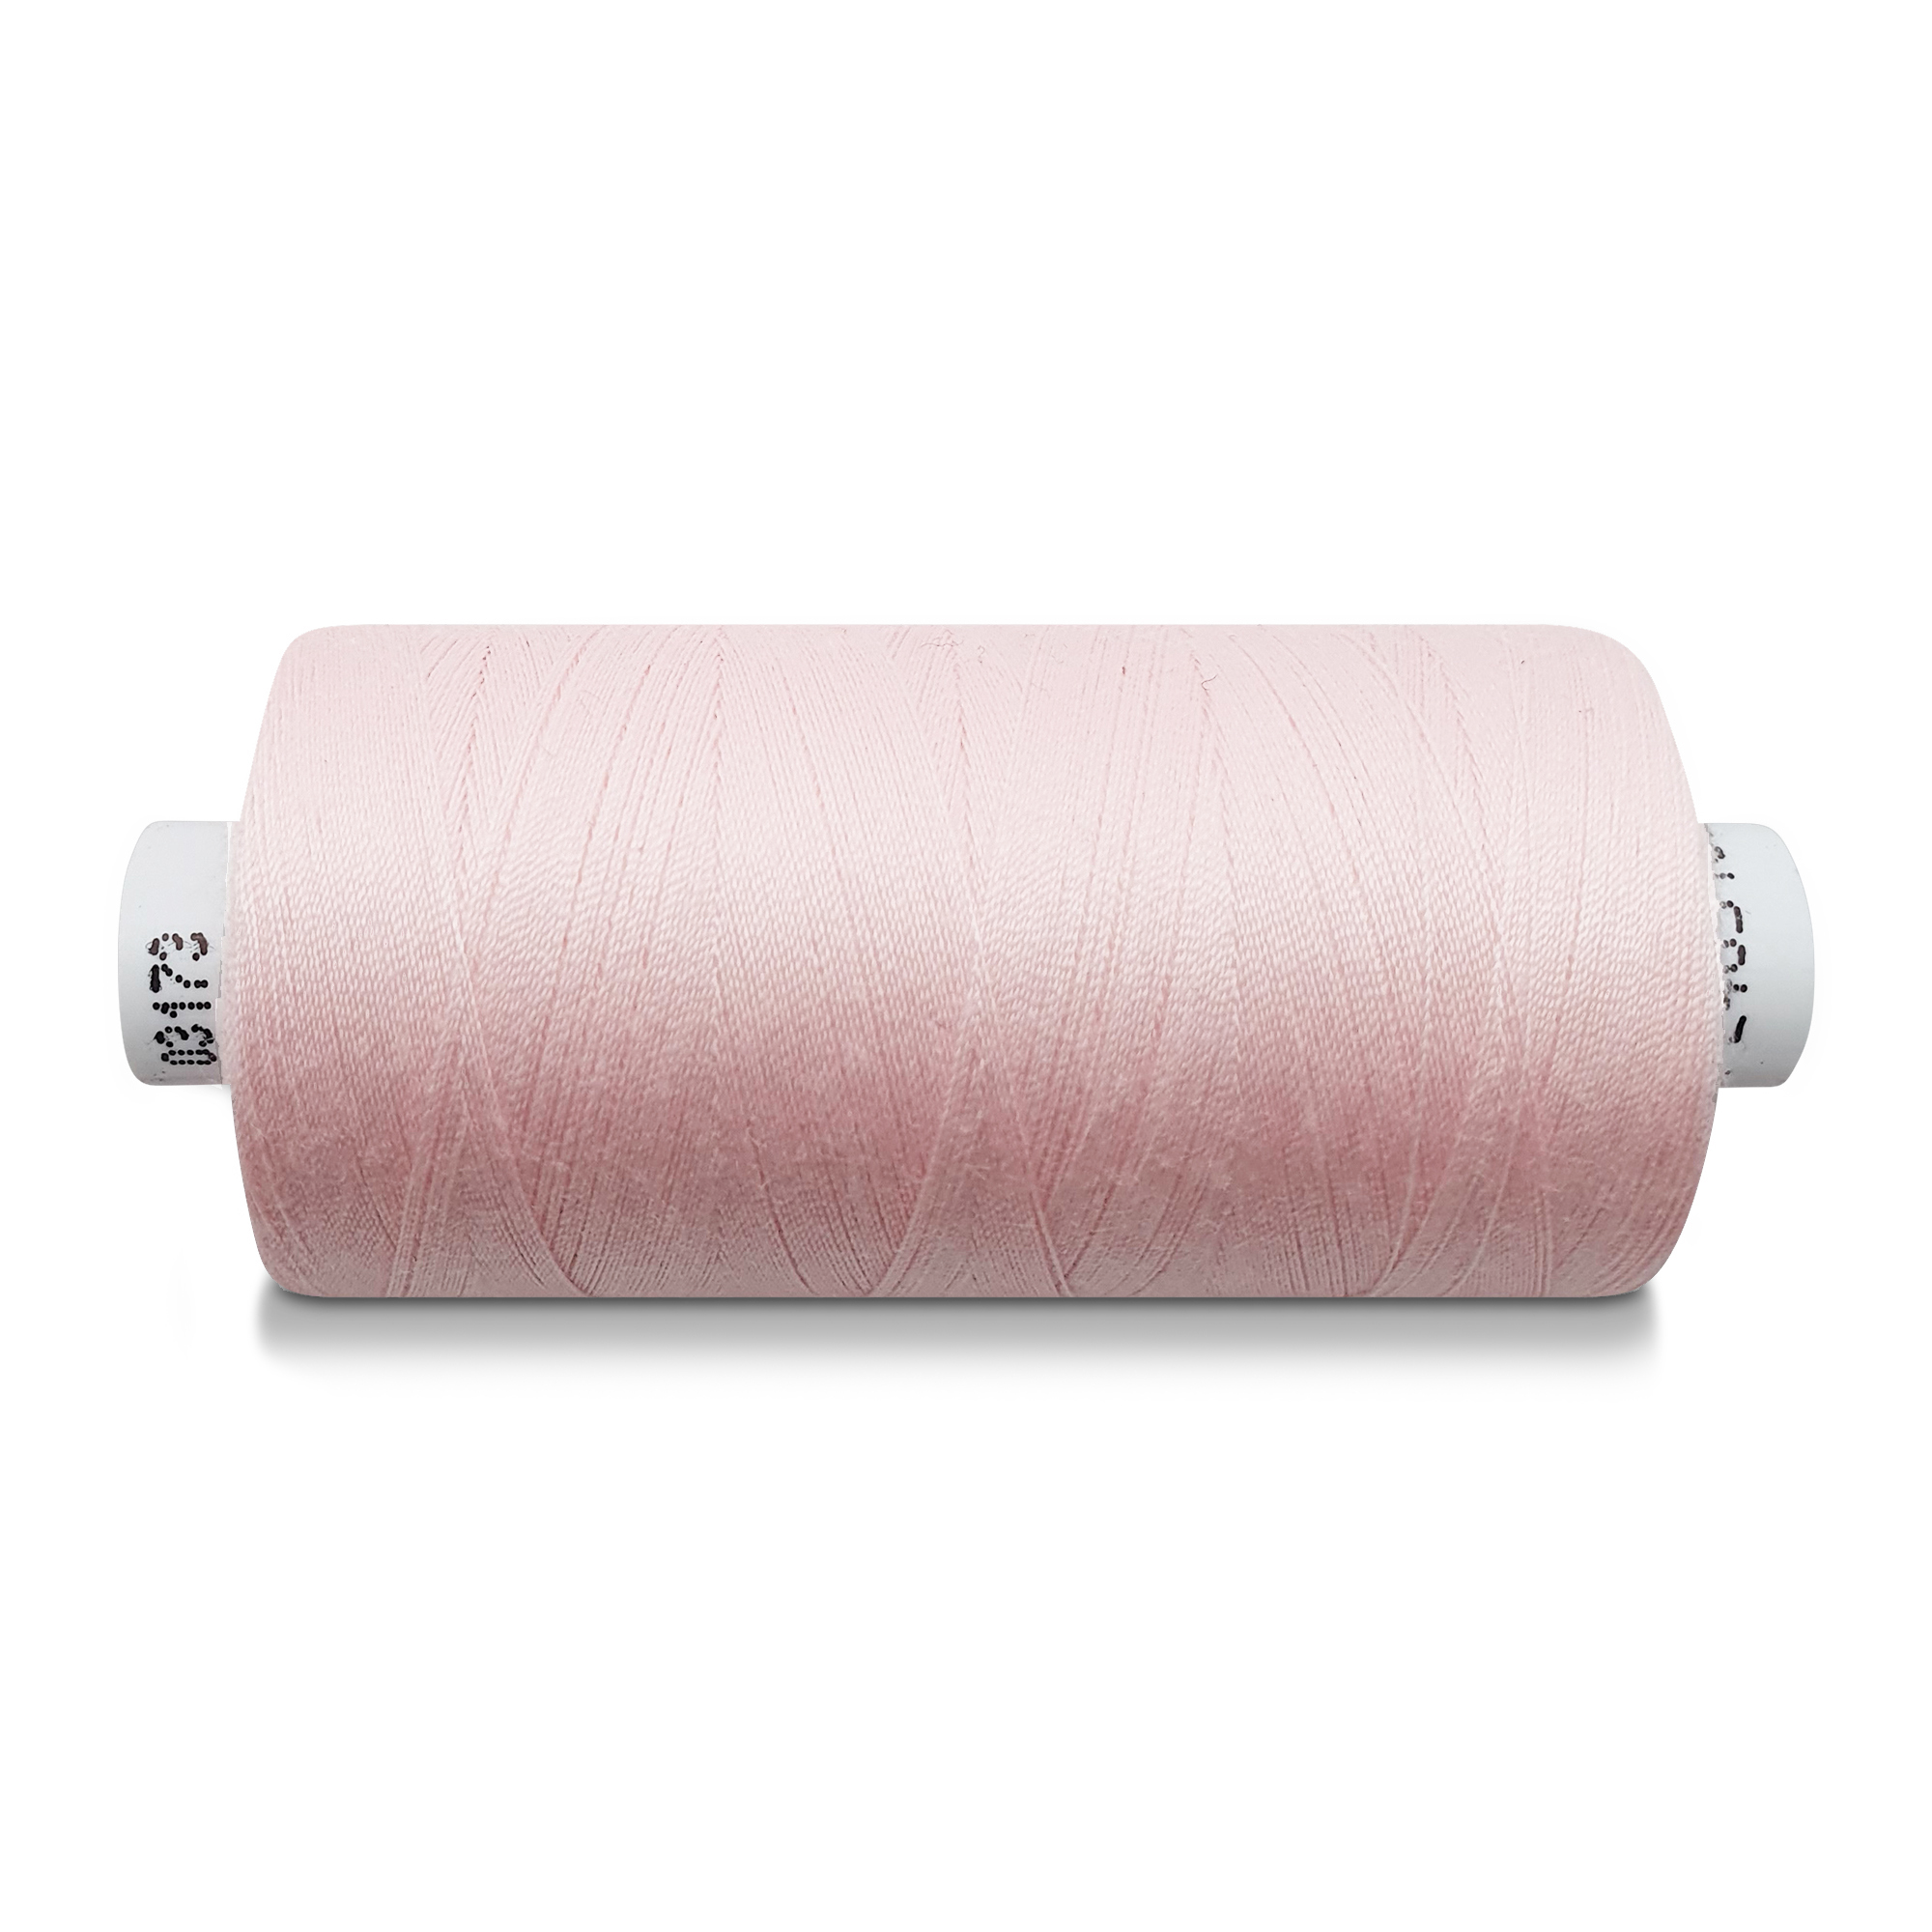 Jeans/Sewing thread cherry blossom